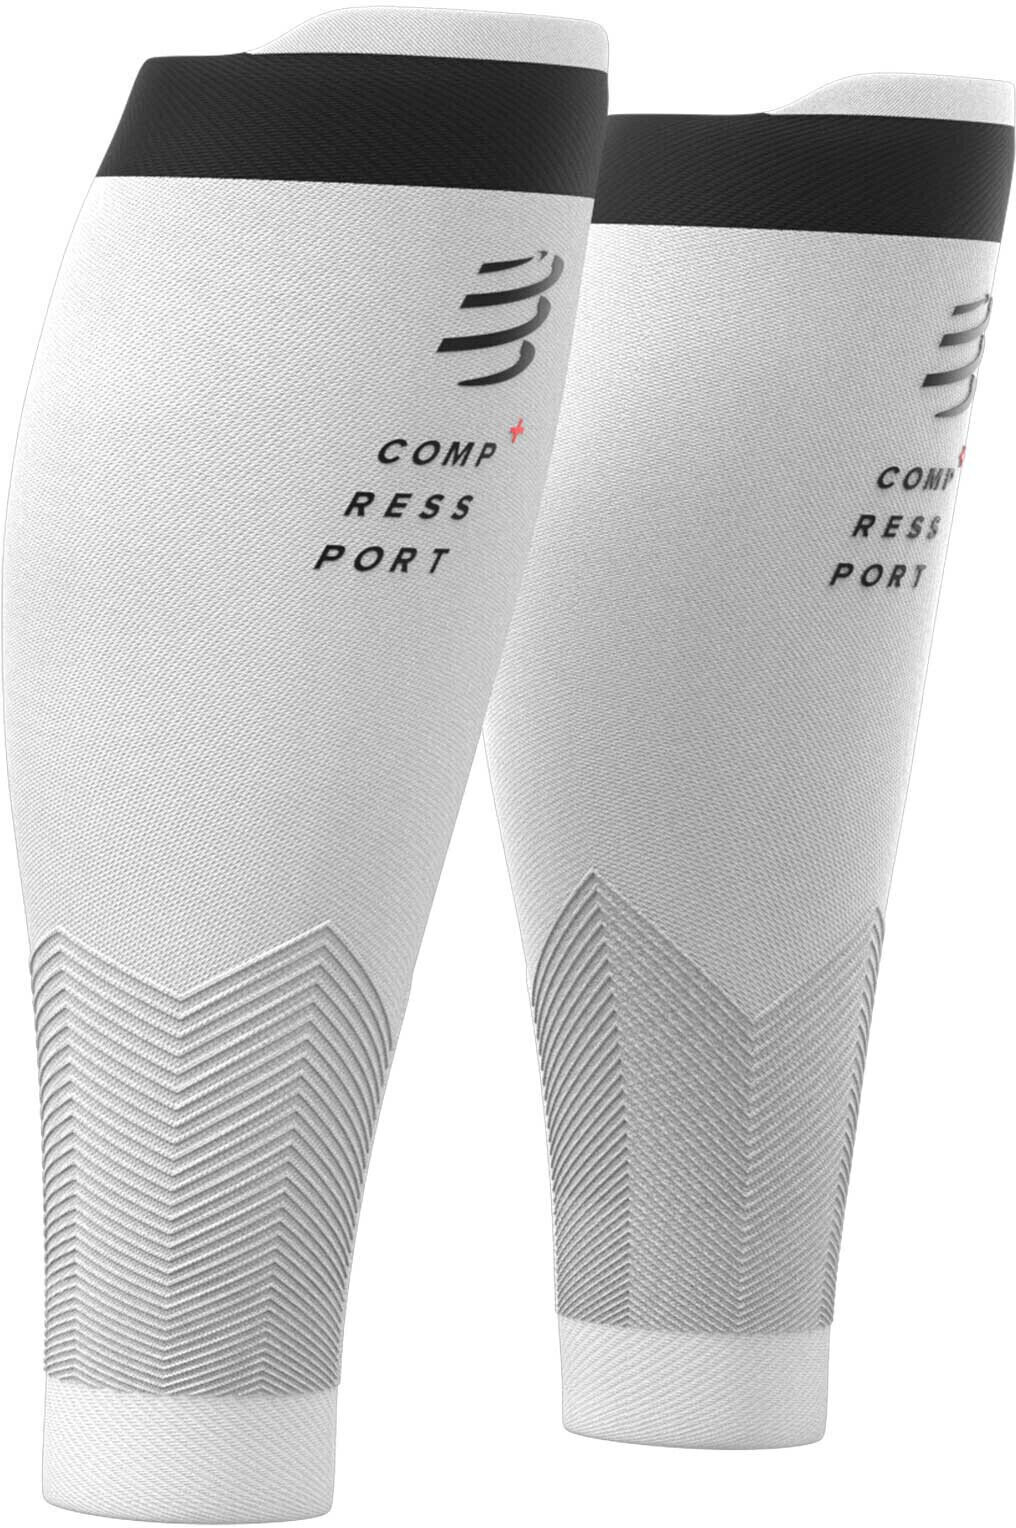 Calf covers for runners Compressport R2v2 White T2 Calf covers for runners